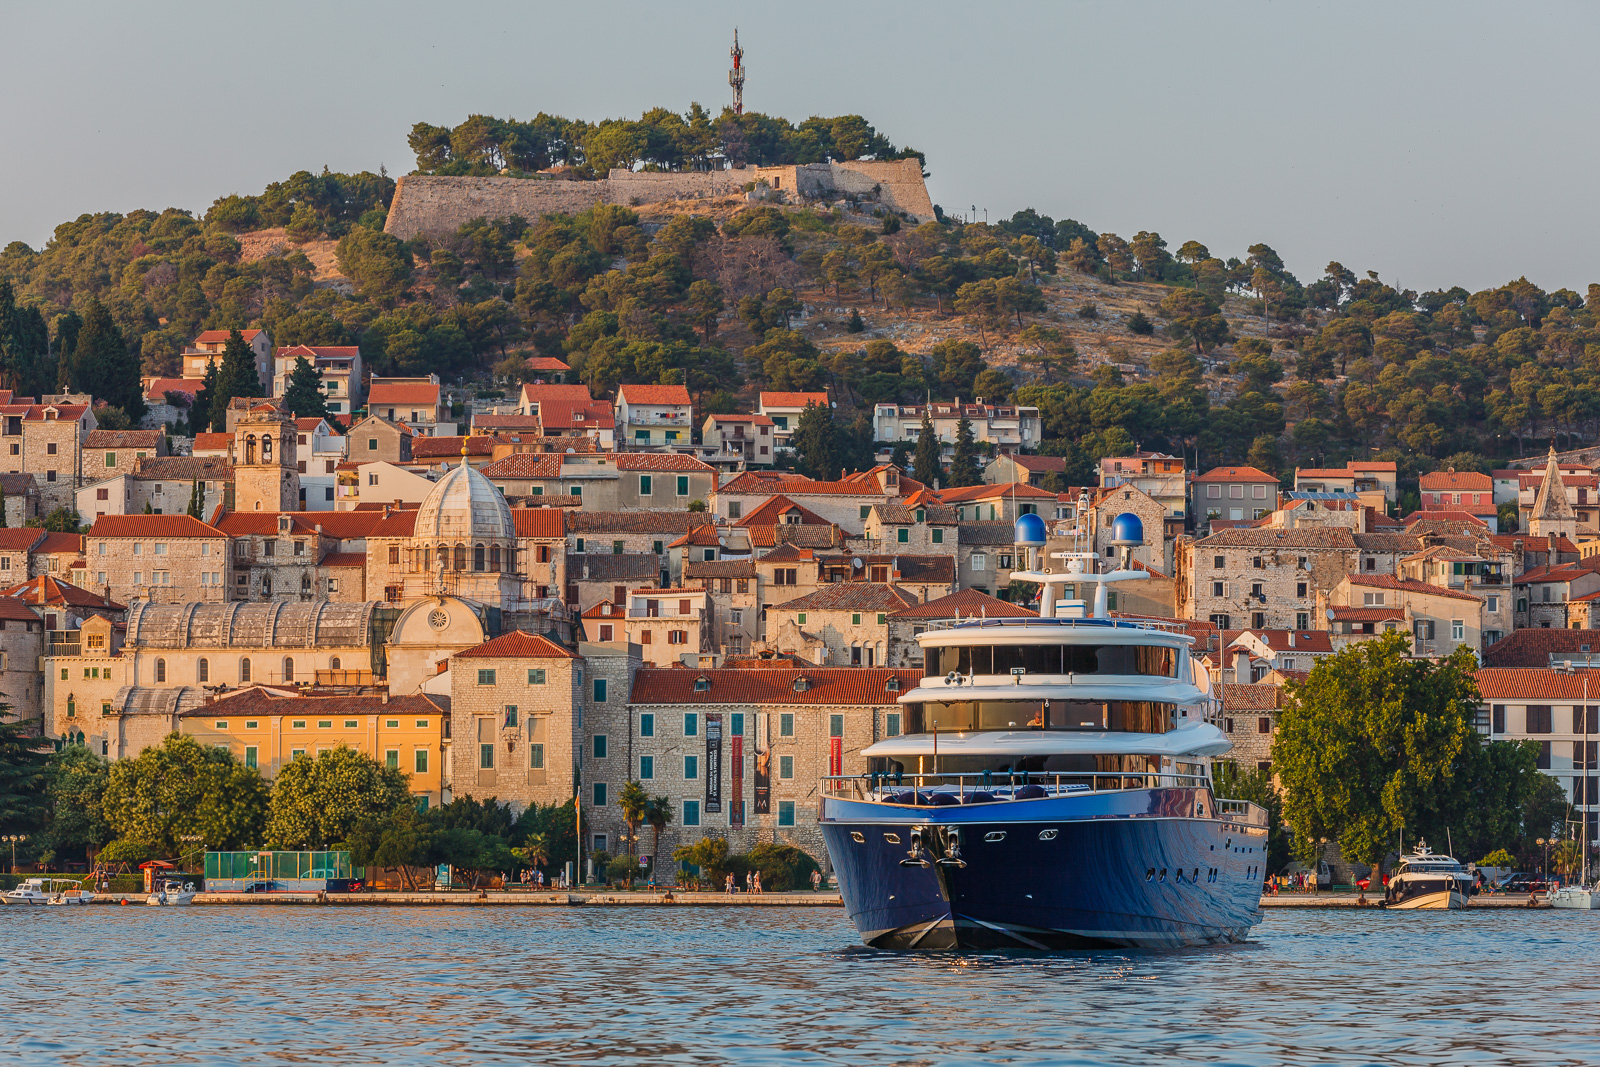 luxury yacht Johnson Baby with blue hull pulling away from port in Croatia